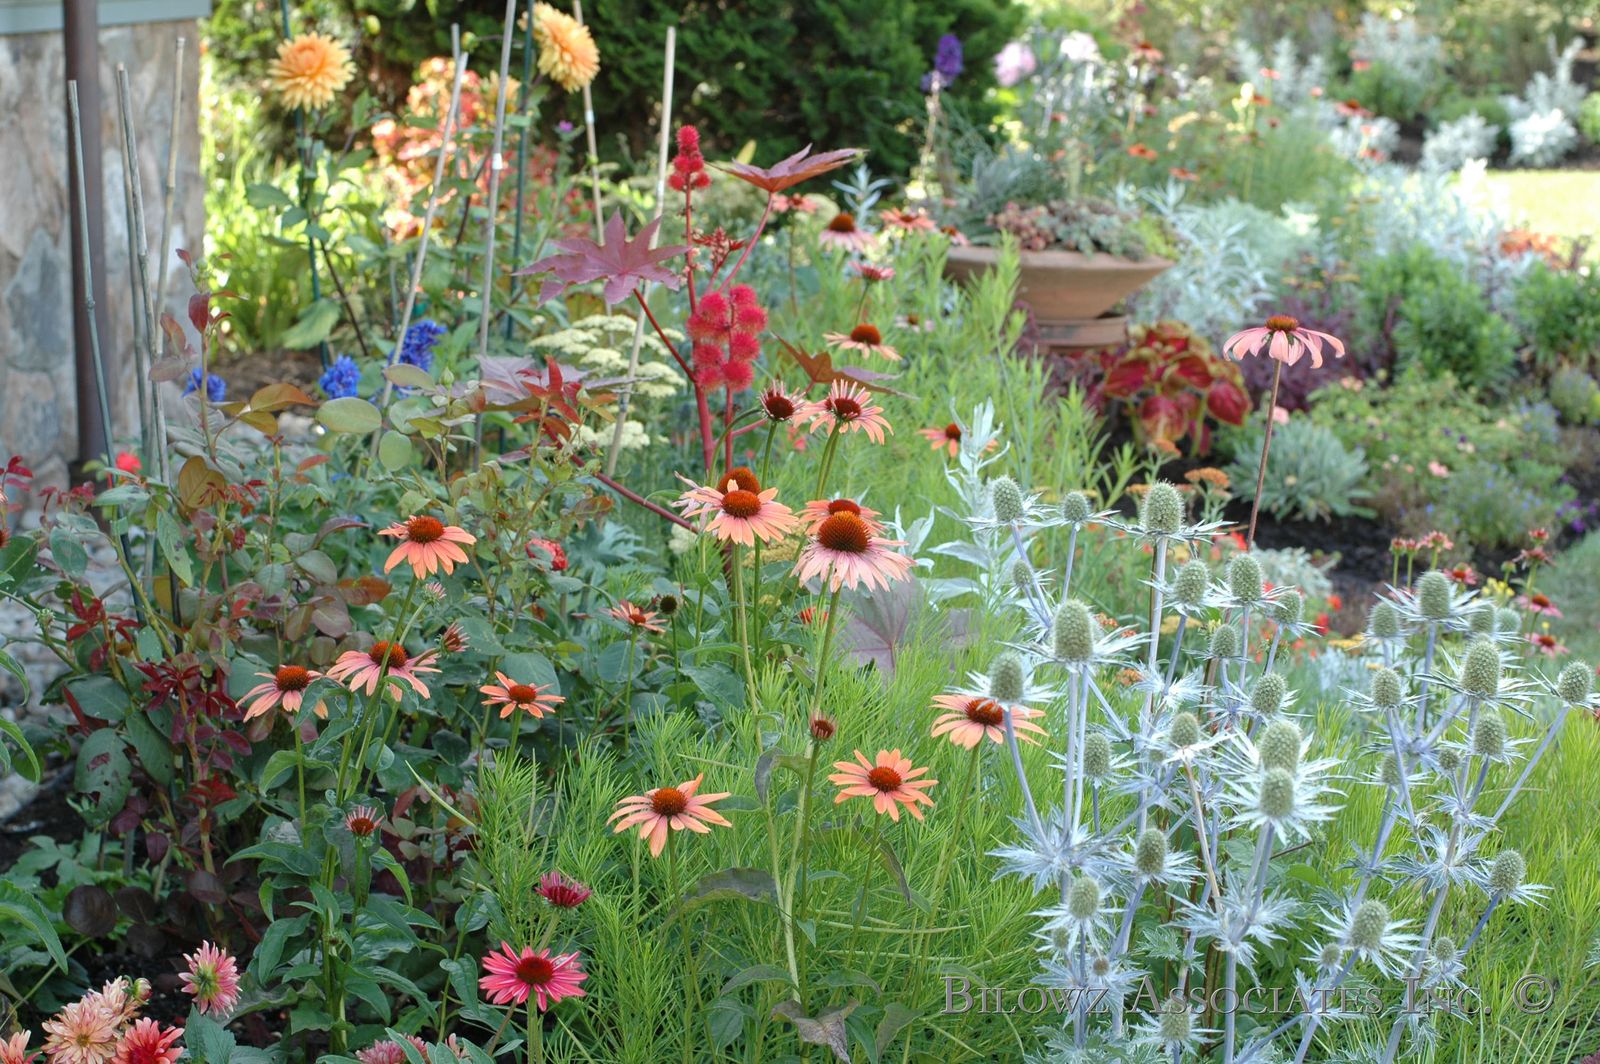 A Perennial Border popping with color - Image and design by Bilowz Associates Inc. Copyright.jpg